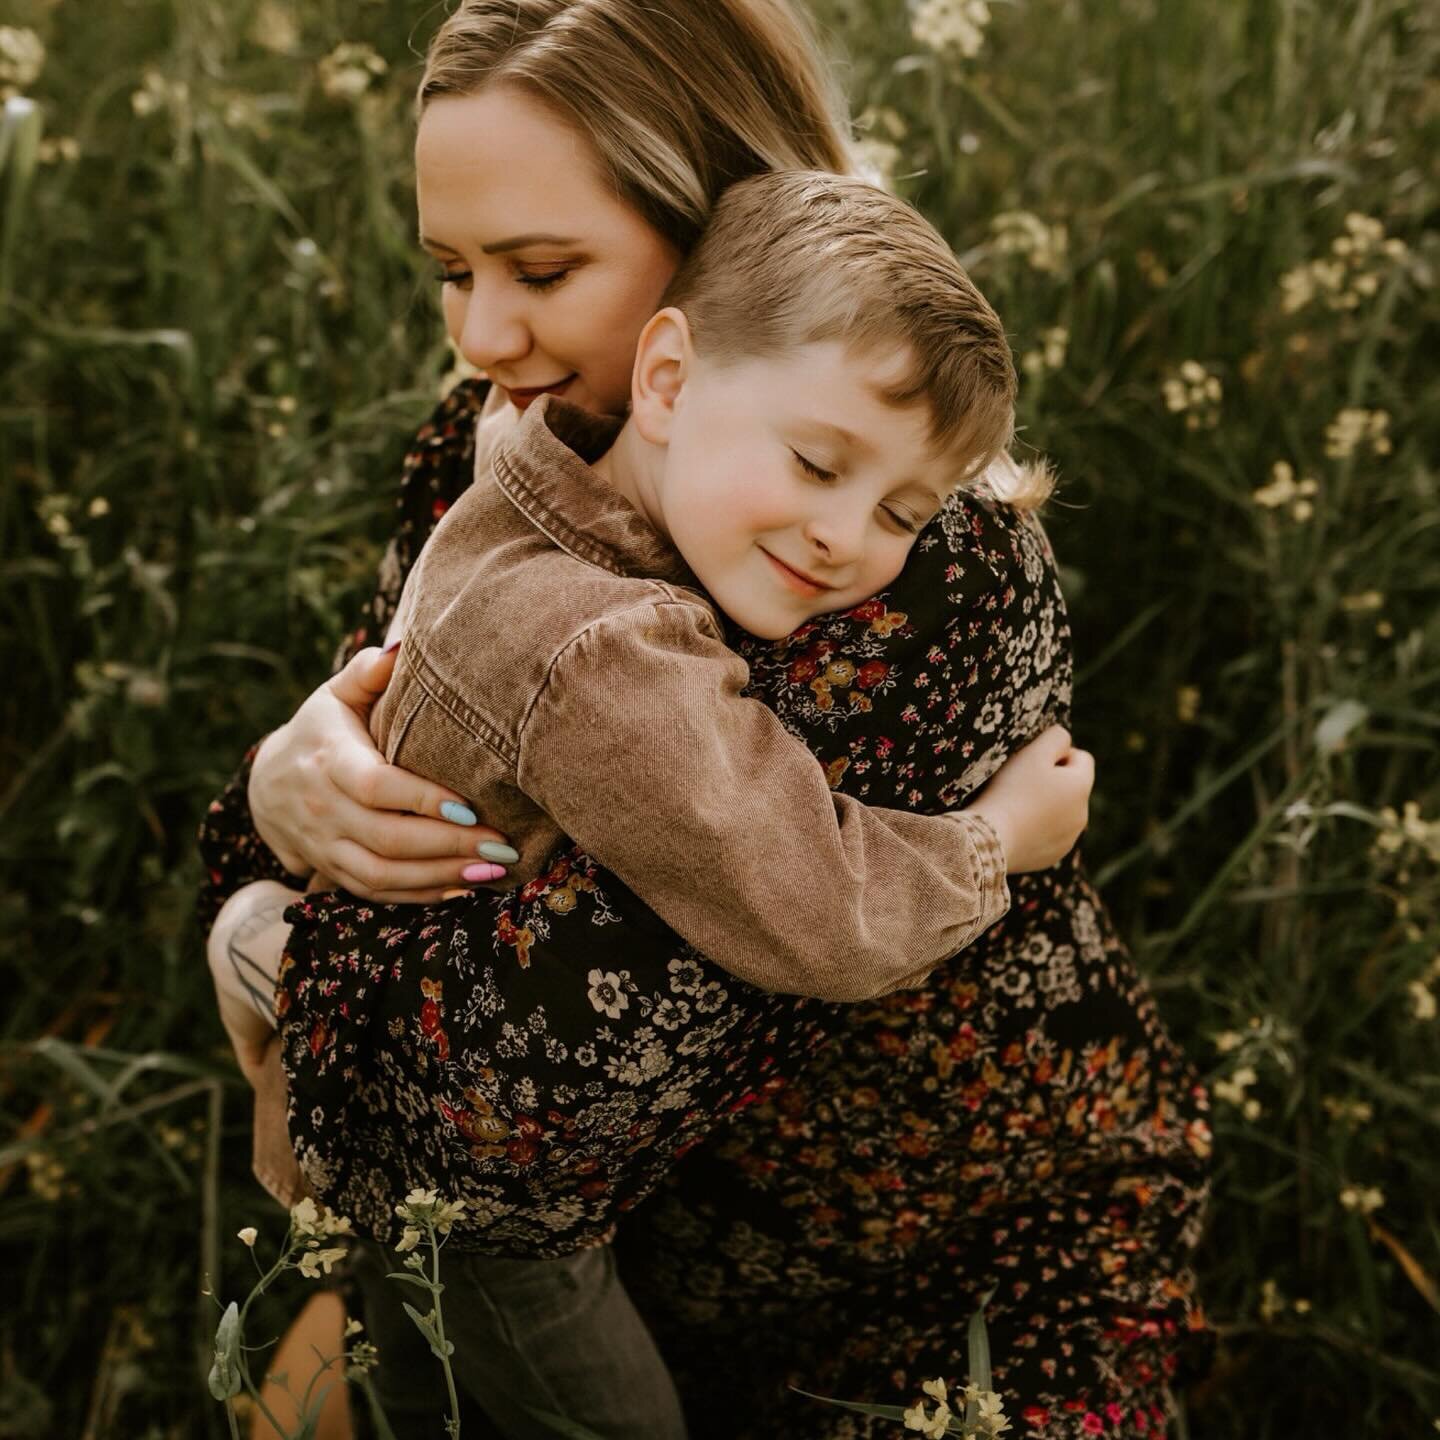 Sweet Asher. 🩷 
These motherhood sessions have been so fun to capture and such beautiful memories made. 🌼💗